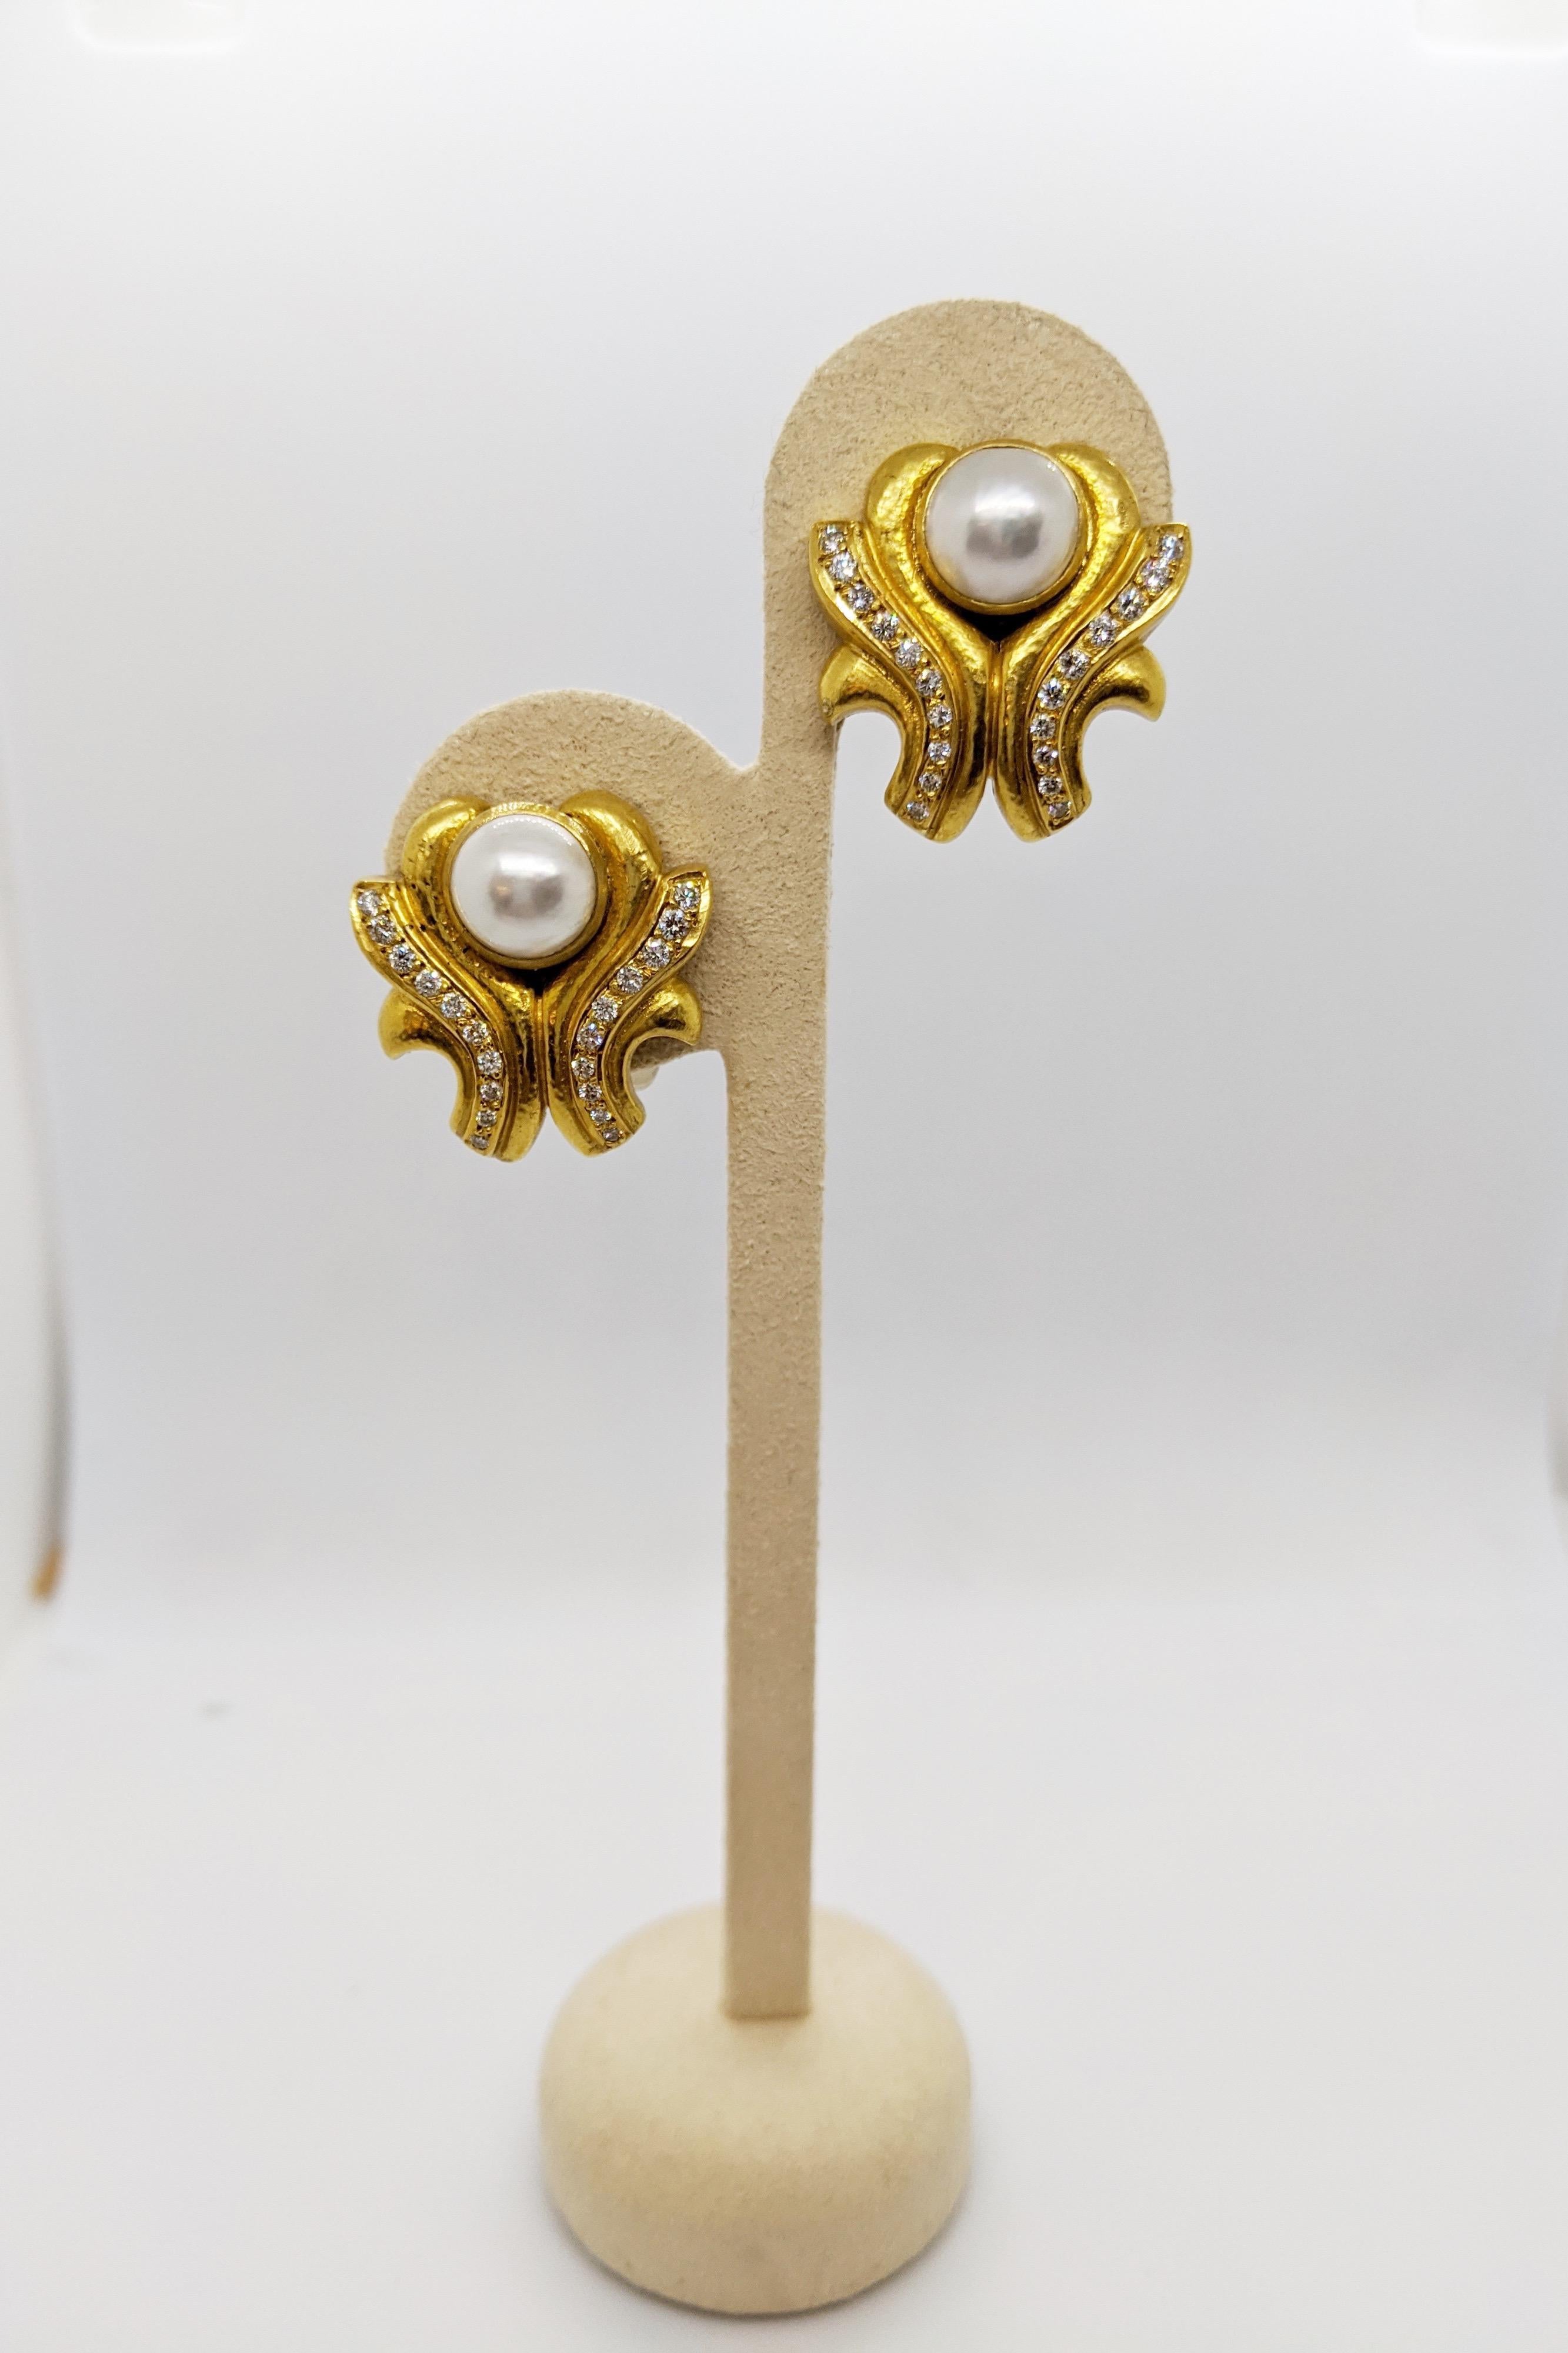 This earrings are designed by Zolotas of Athens , Greece. Founded in 1895 the company merges Greek heritage with modern style to create these timeless pieces. Coveted by Royals and Actresses.
These earrings center a 10.5 mm mabe pearl. Twenty